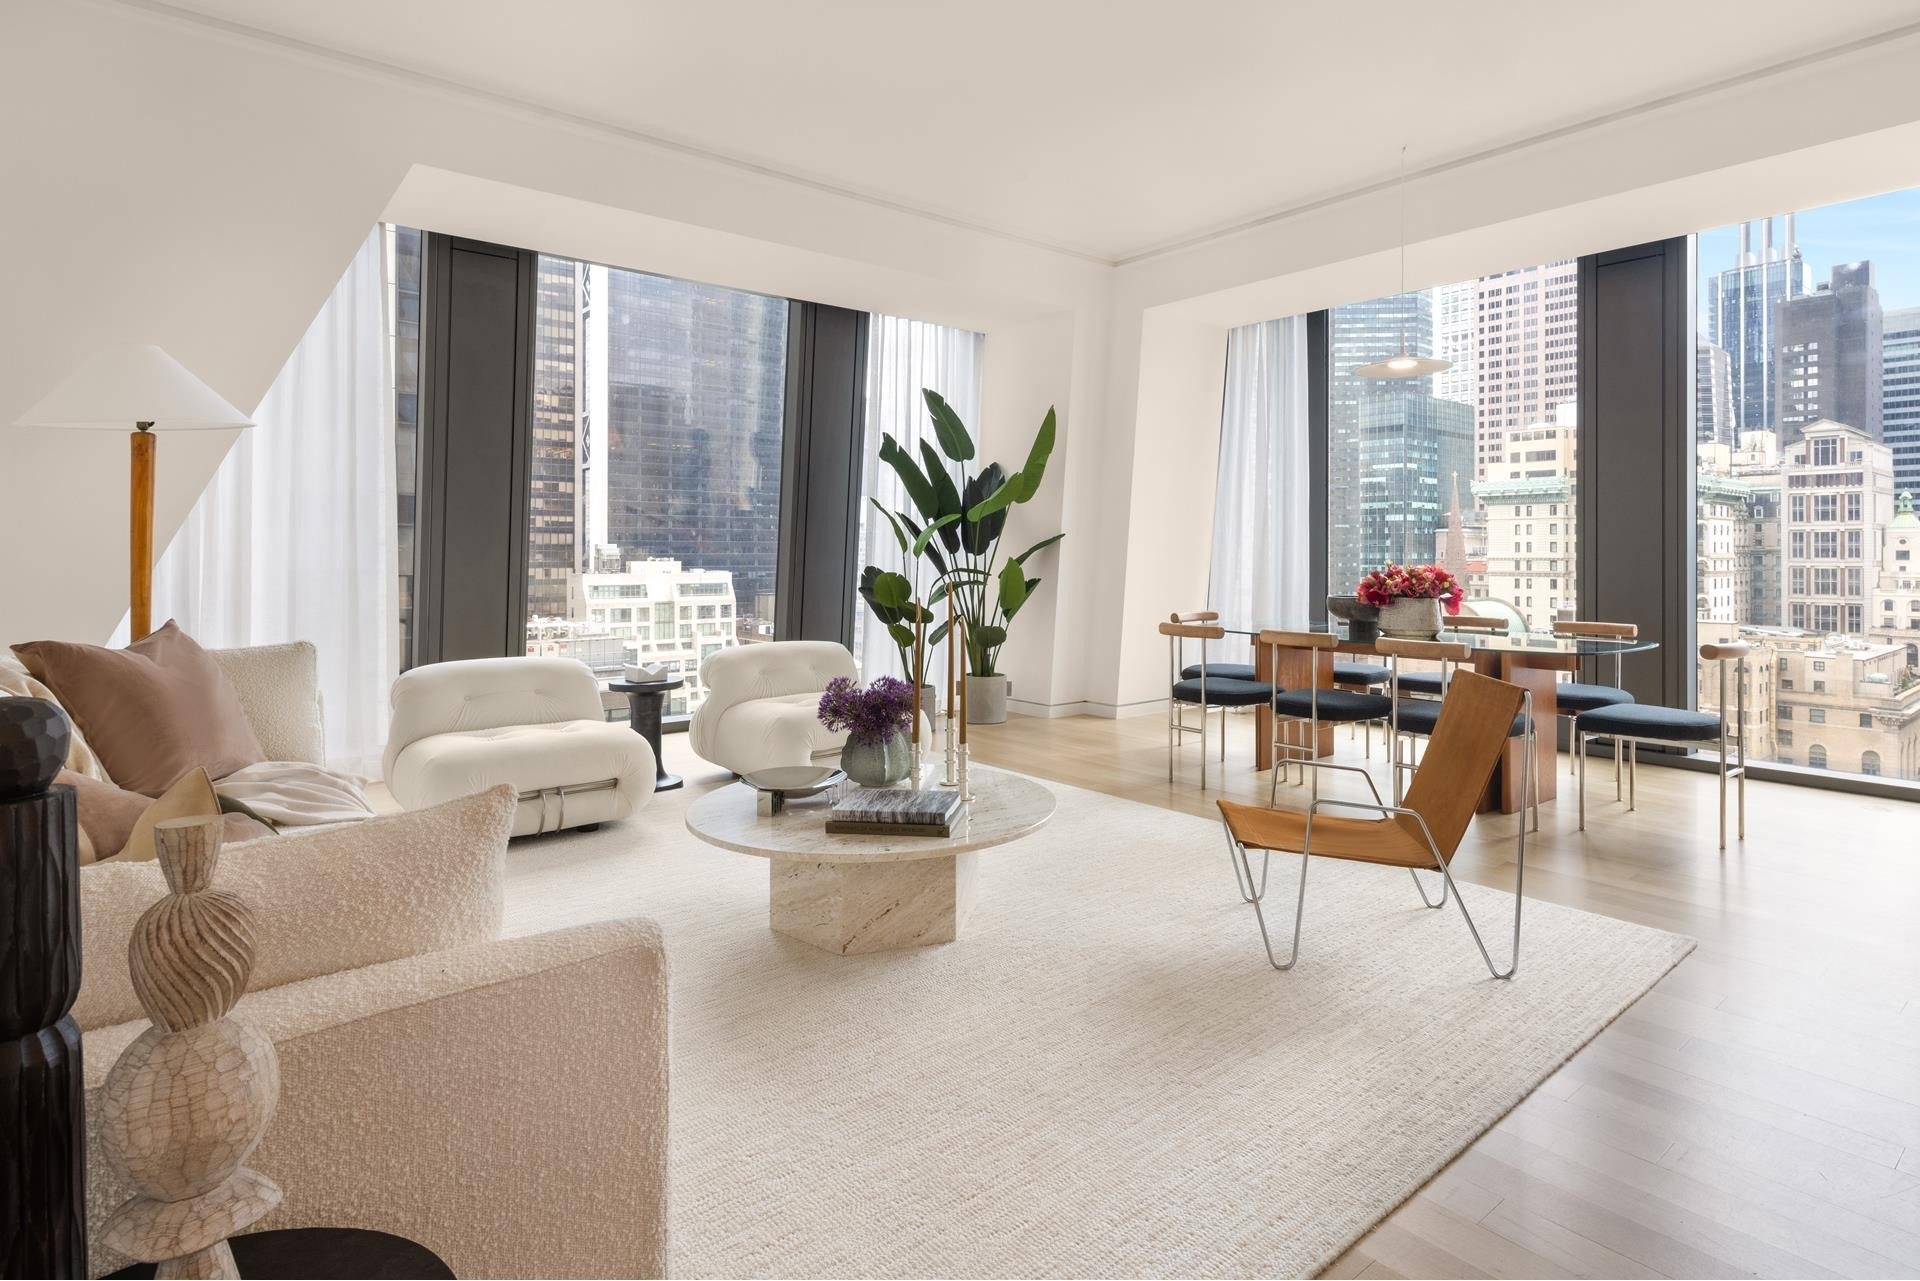 Condominium for Sale at 53W53, 53 53RD ST W, 21A Midtown West, New York, New York 10019